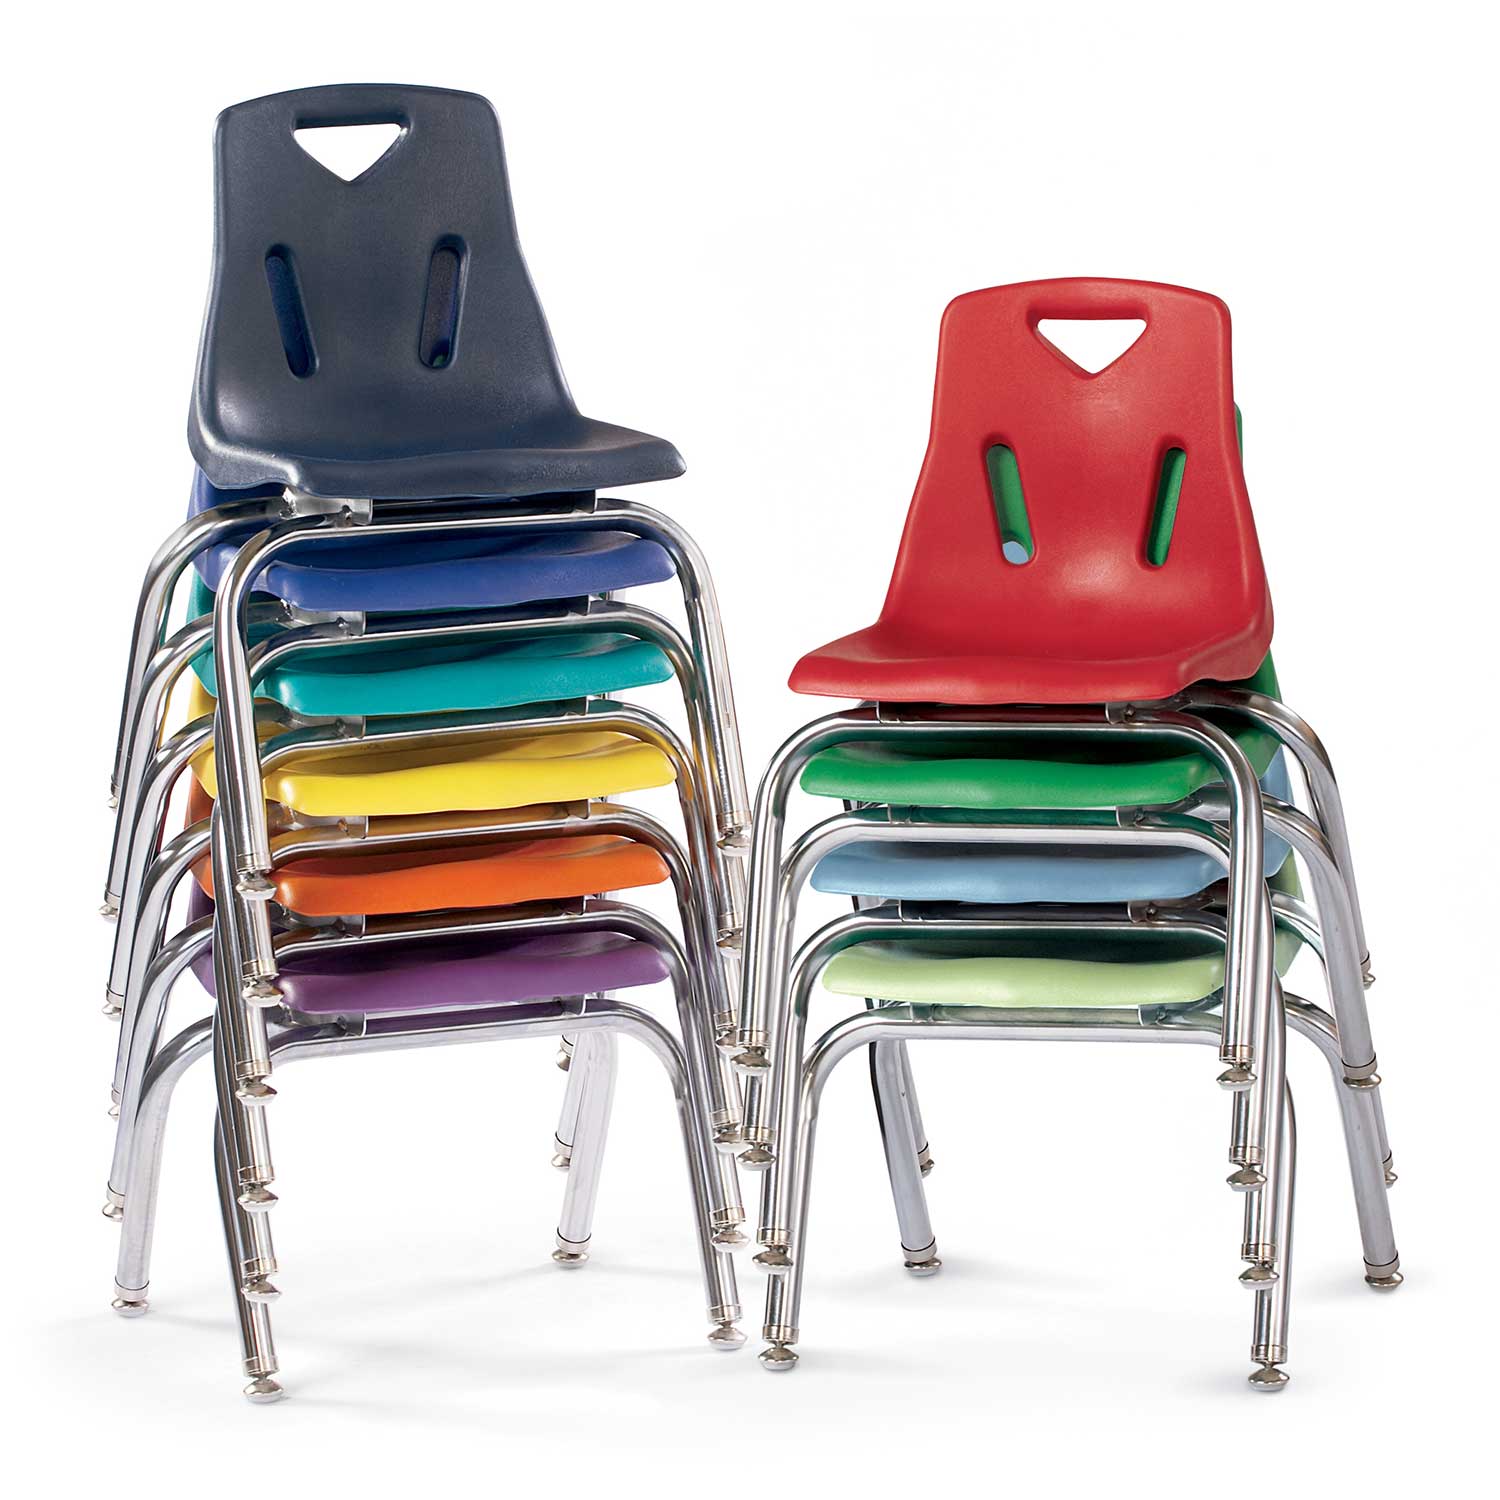 Berries® Plastic Chairs with Chrome Legs